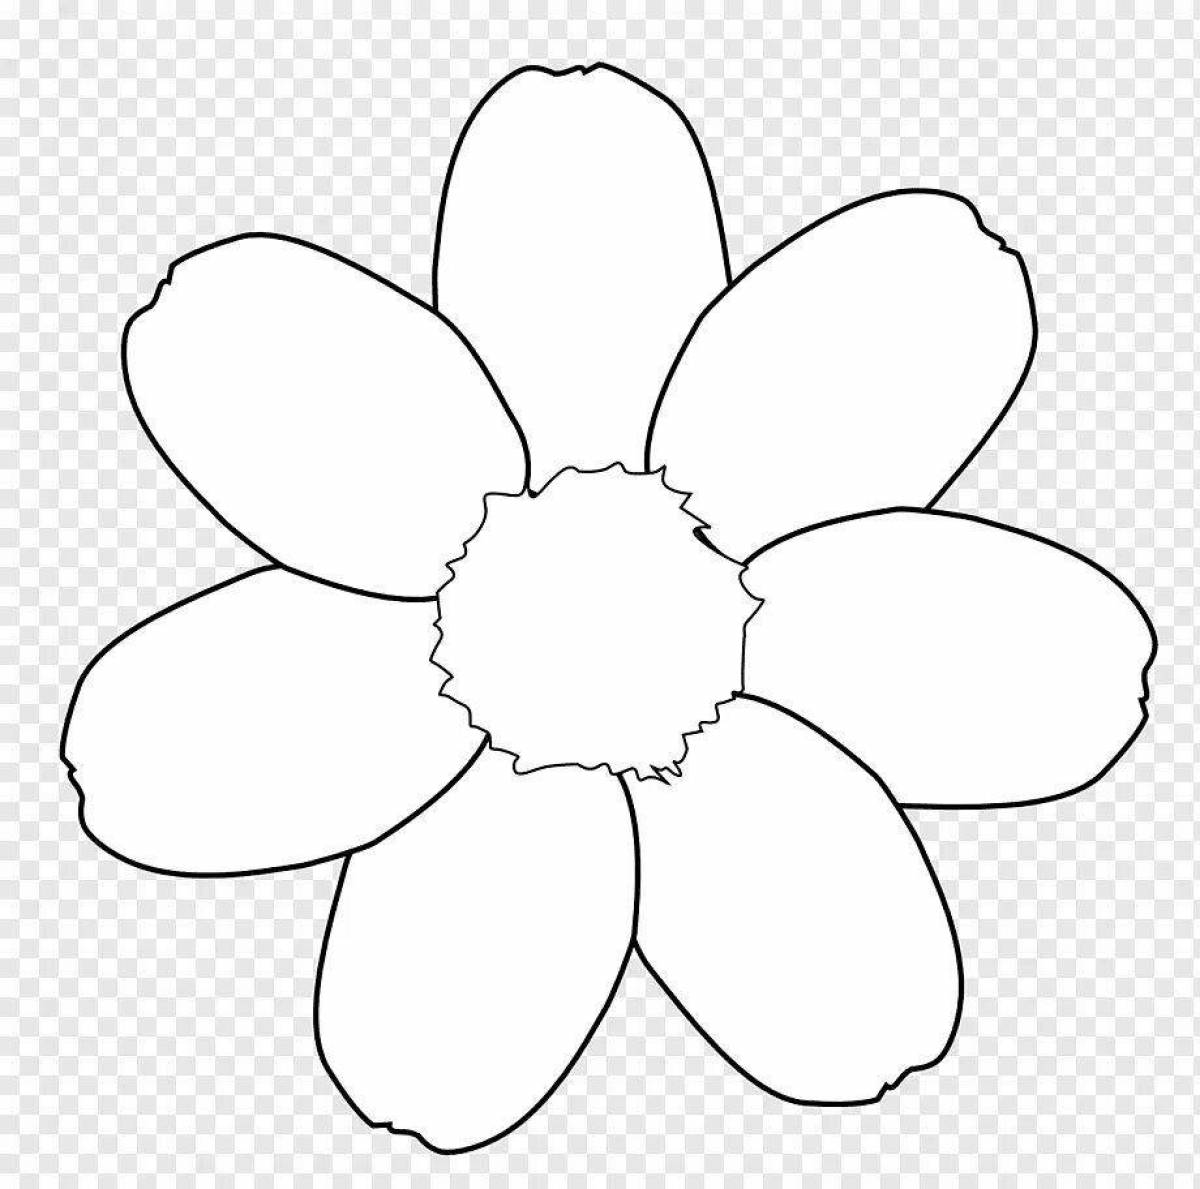 Fancy coloring flower without stem